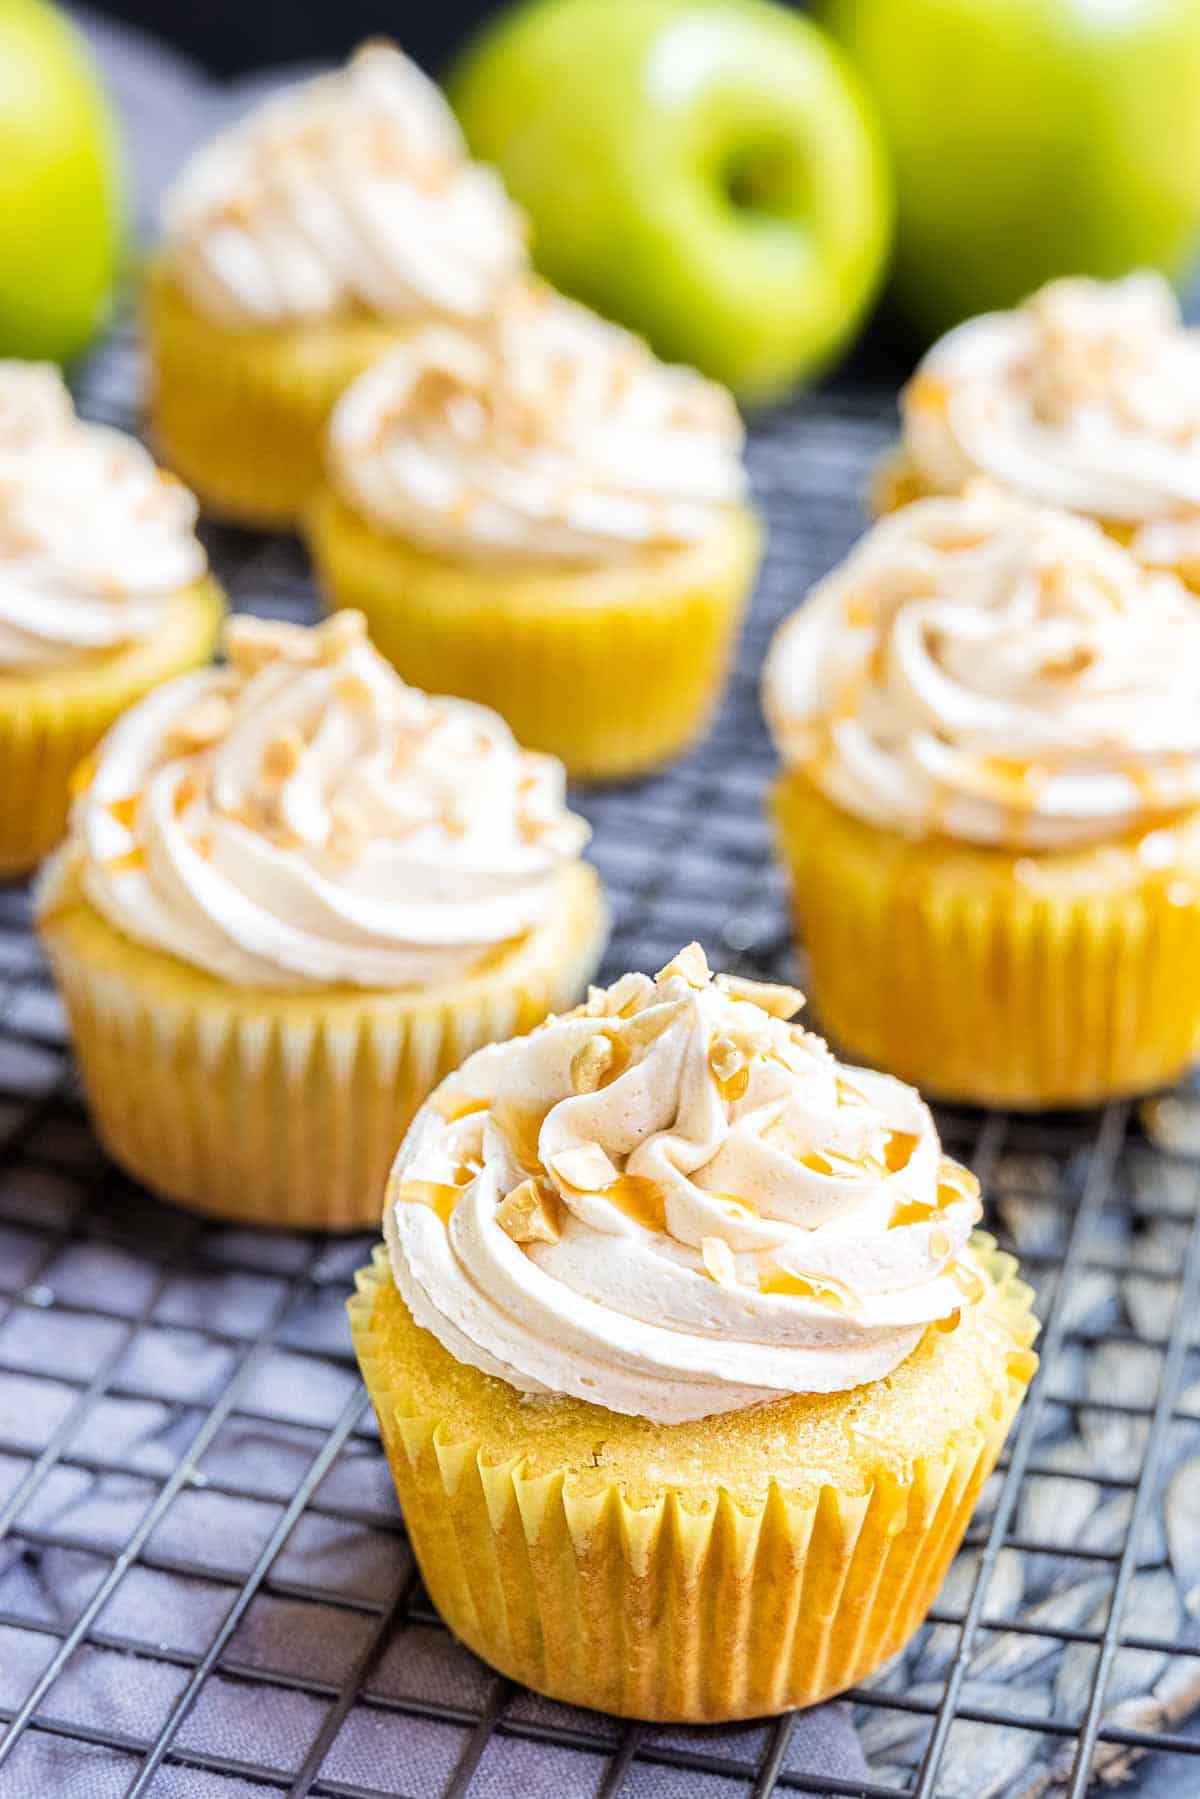 Caramel apple cupcakes with a drizzle of caramel sauce on top.